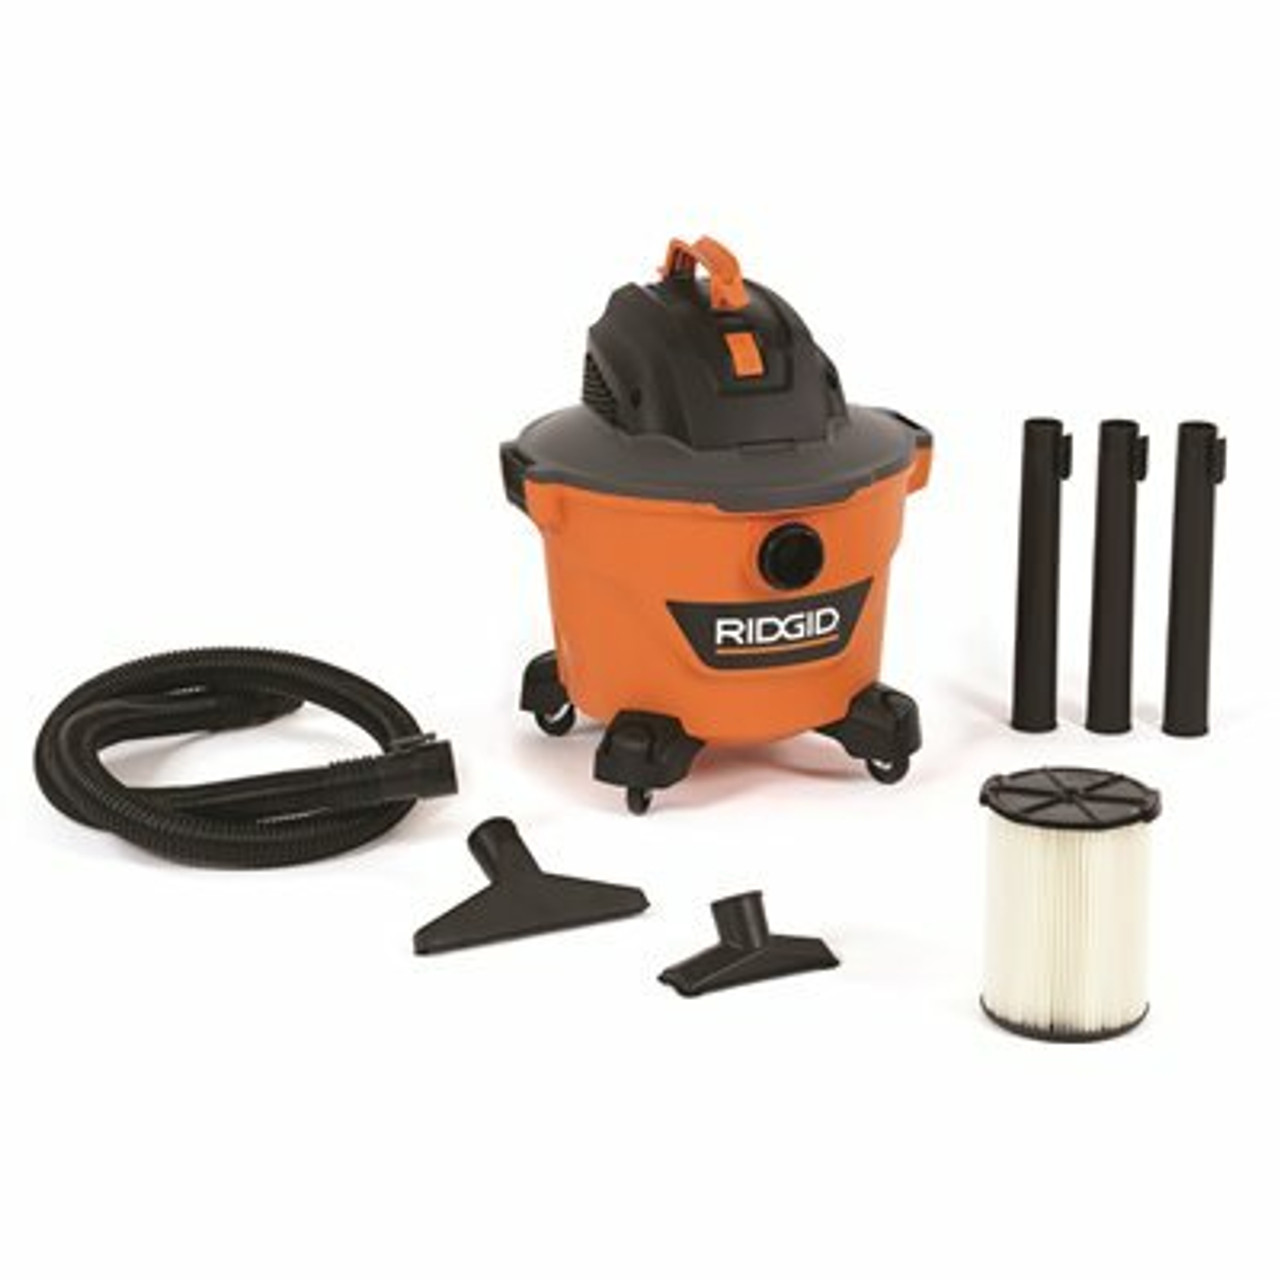 Ridgid 9 Gal. 4.25-Peak Hp Nxt Wet/Dry Shop Vacuum With Filter, Hose And Accessories